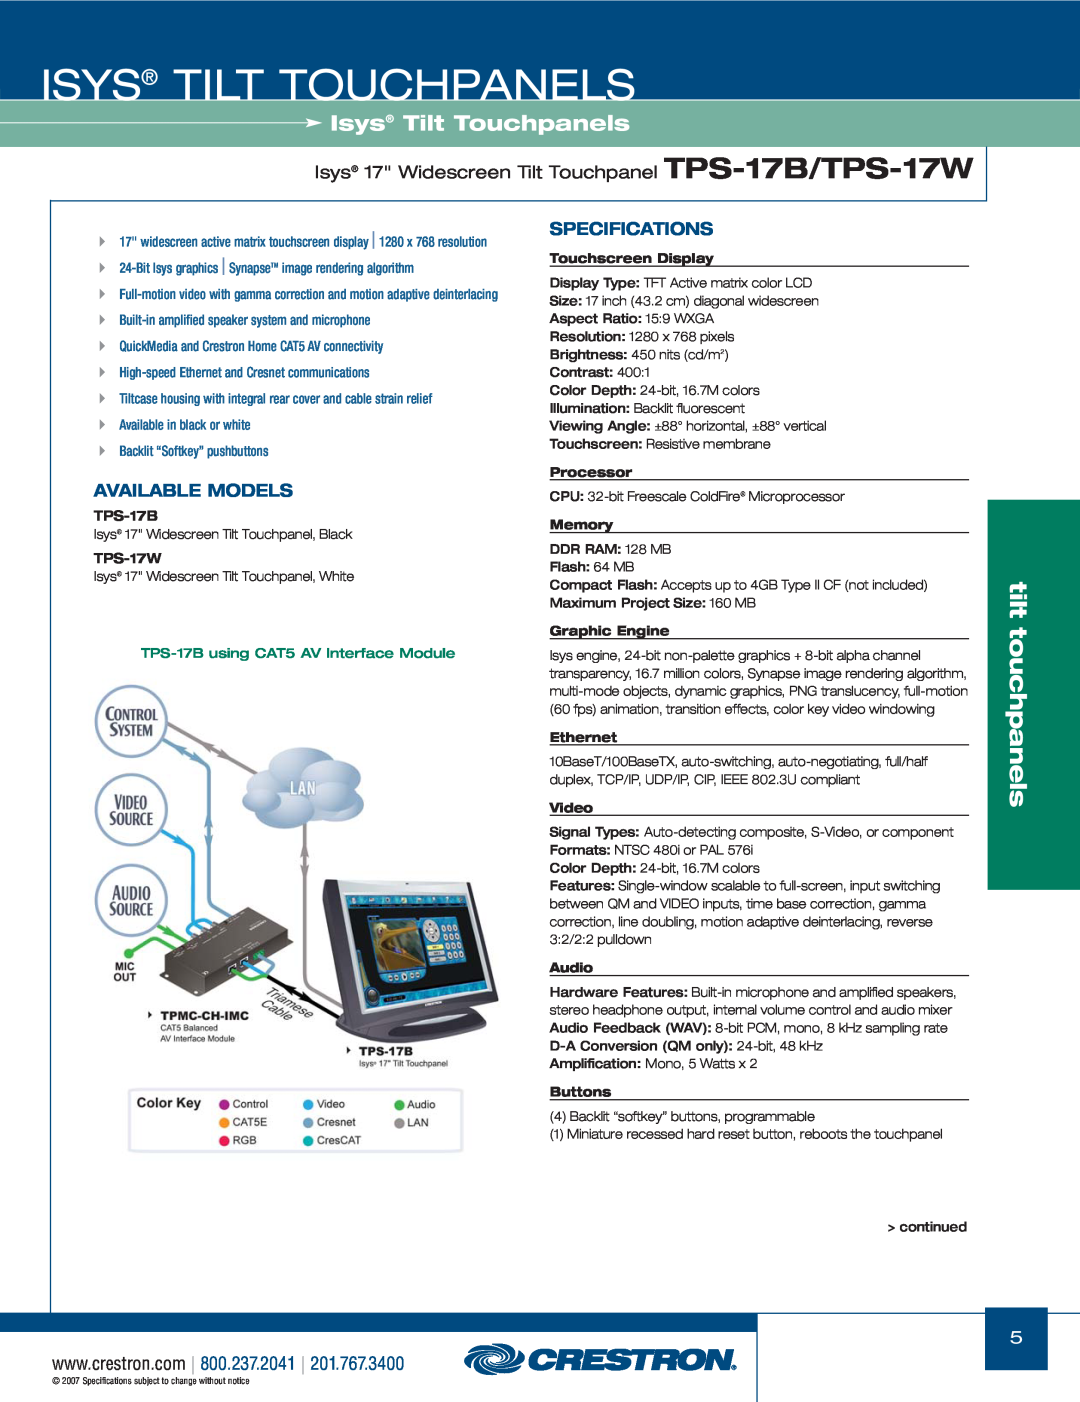 Crestron electronic TPS Series Isys 17 Widescreen Tilt Touchpanel TPS-17B/TPS-17W, Specifications, Available Models, Video 